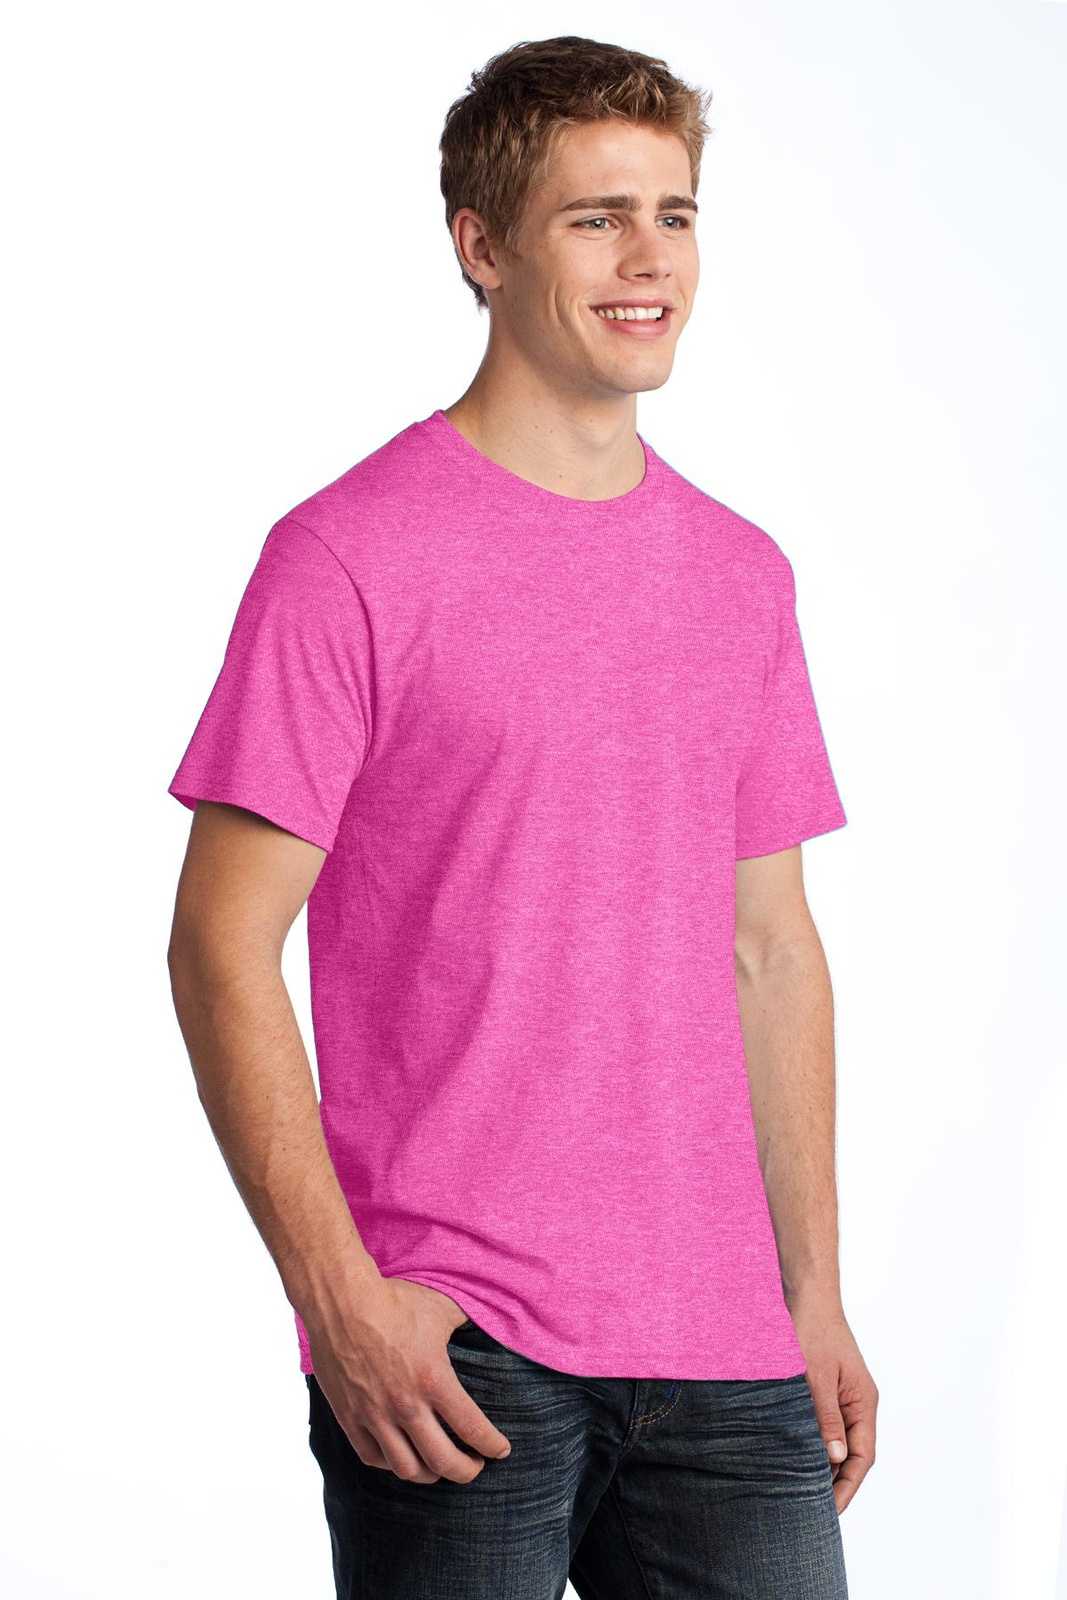 Fruit of the Loom 3930 HD Cotton 100% Cotton T-Shirt - Retro Heather Pink - HIT a Double